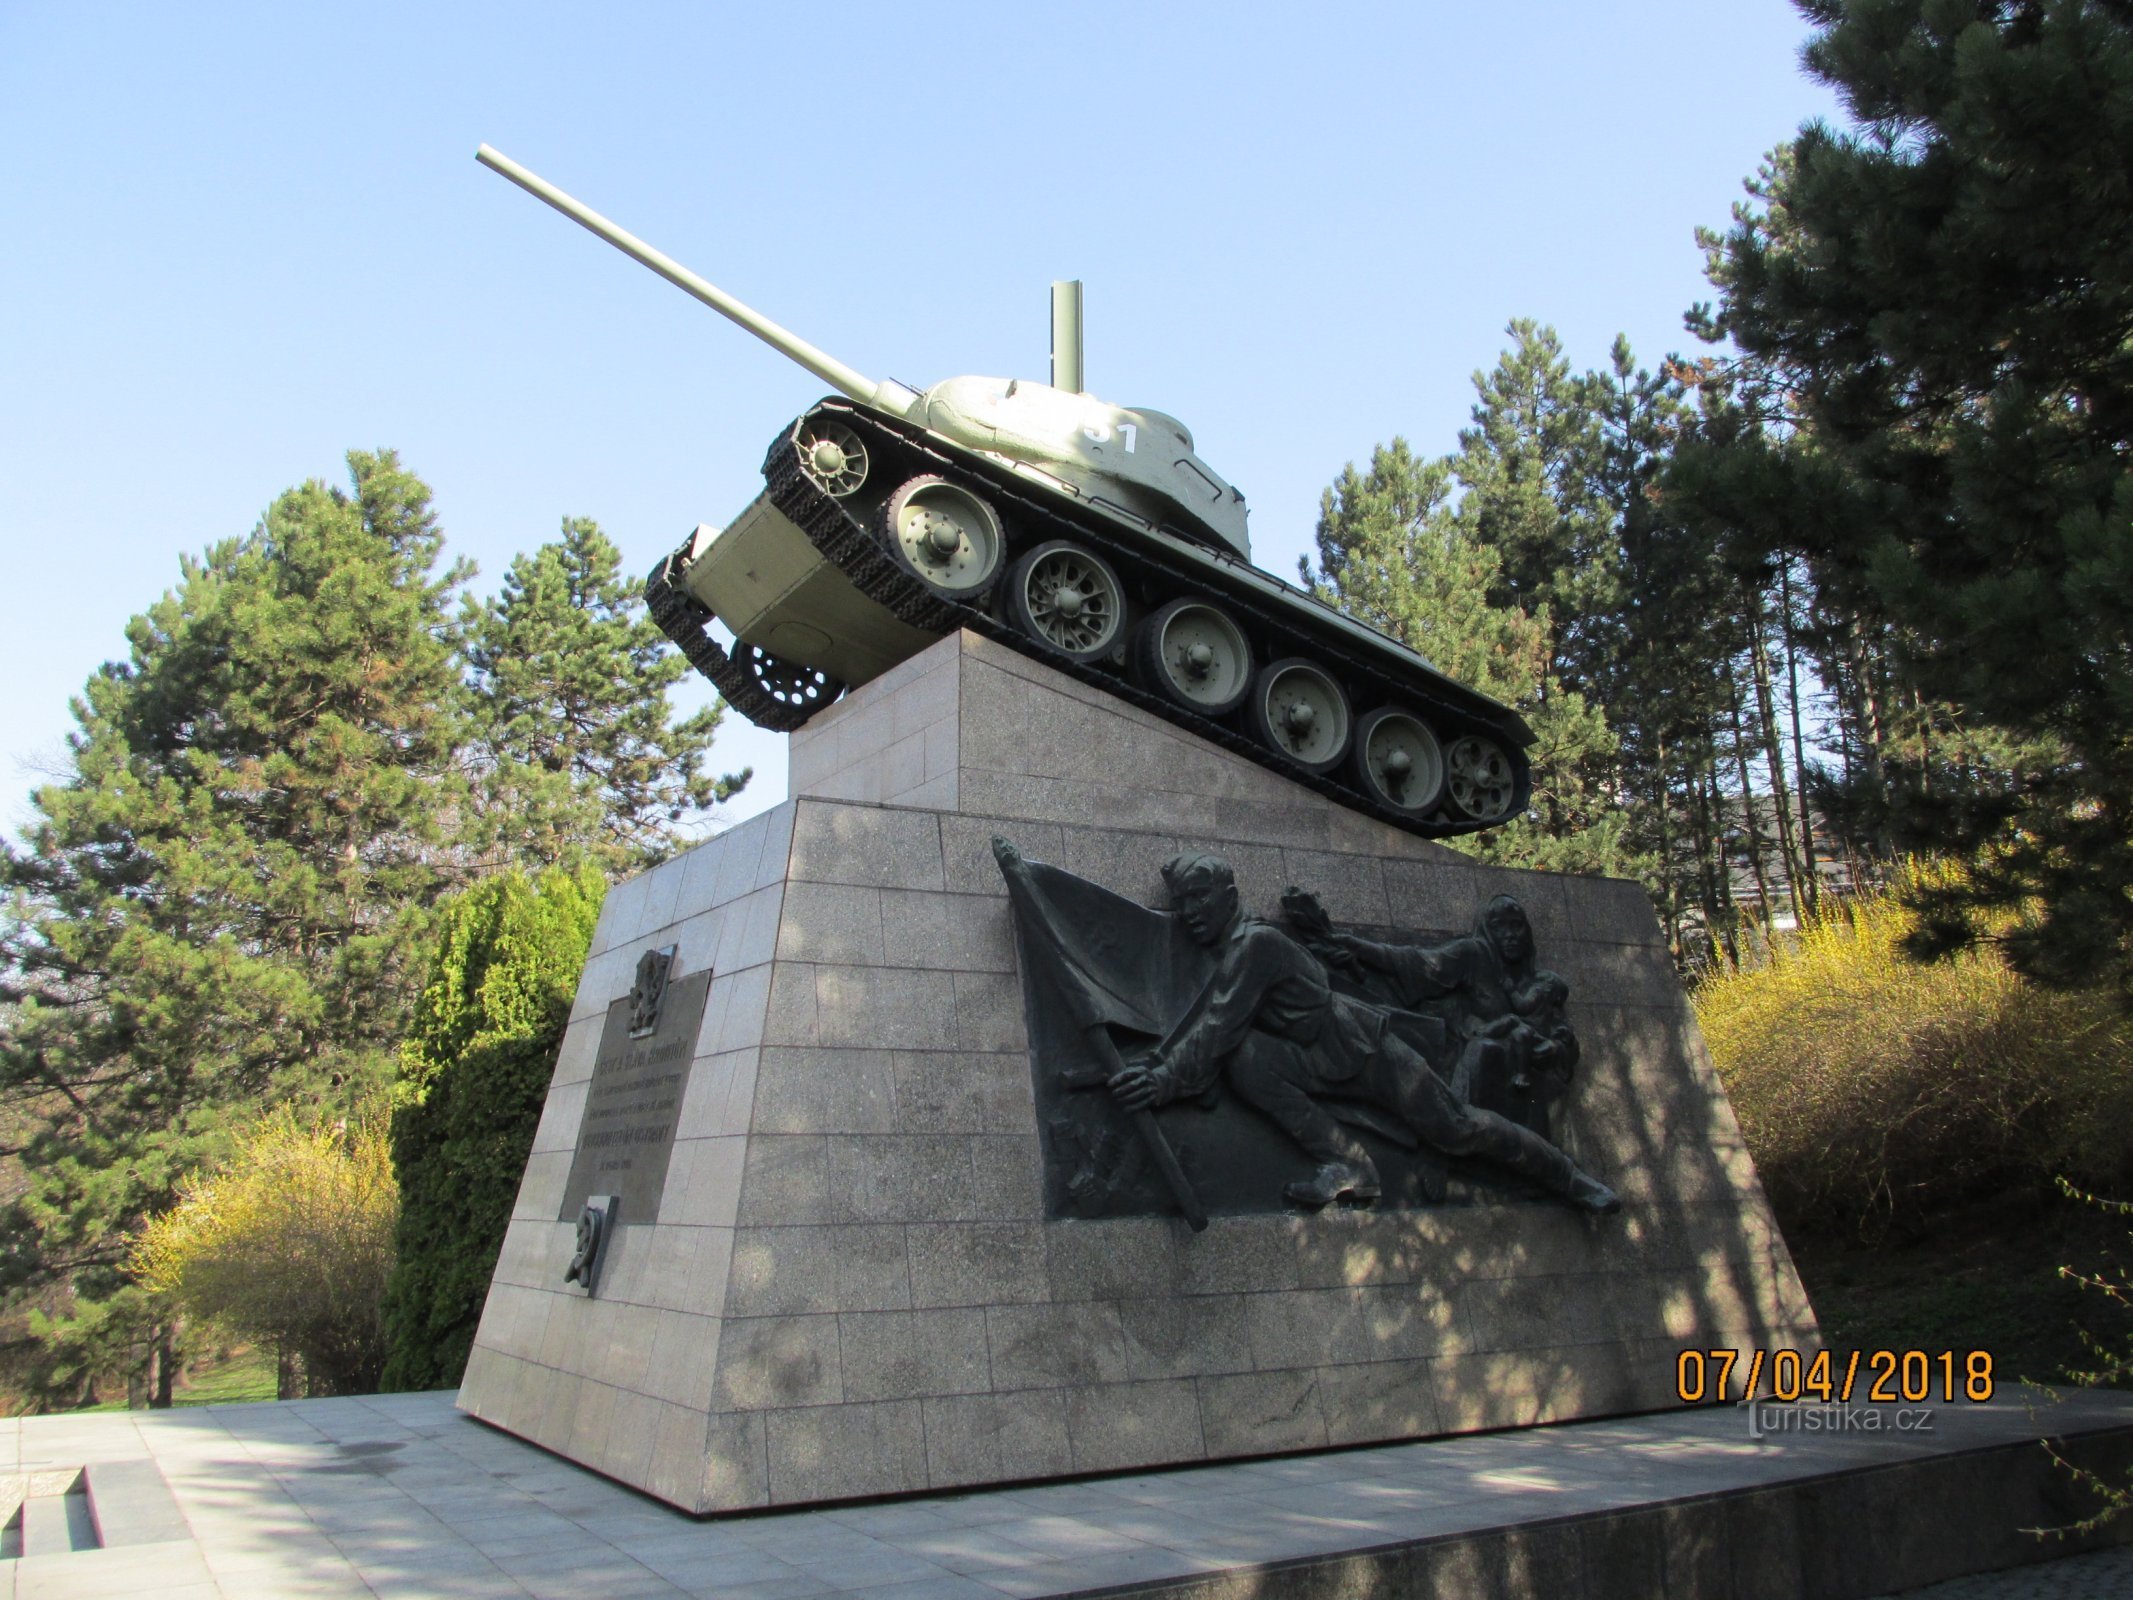 The tank that liberated Ostrava